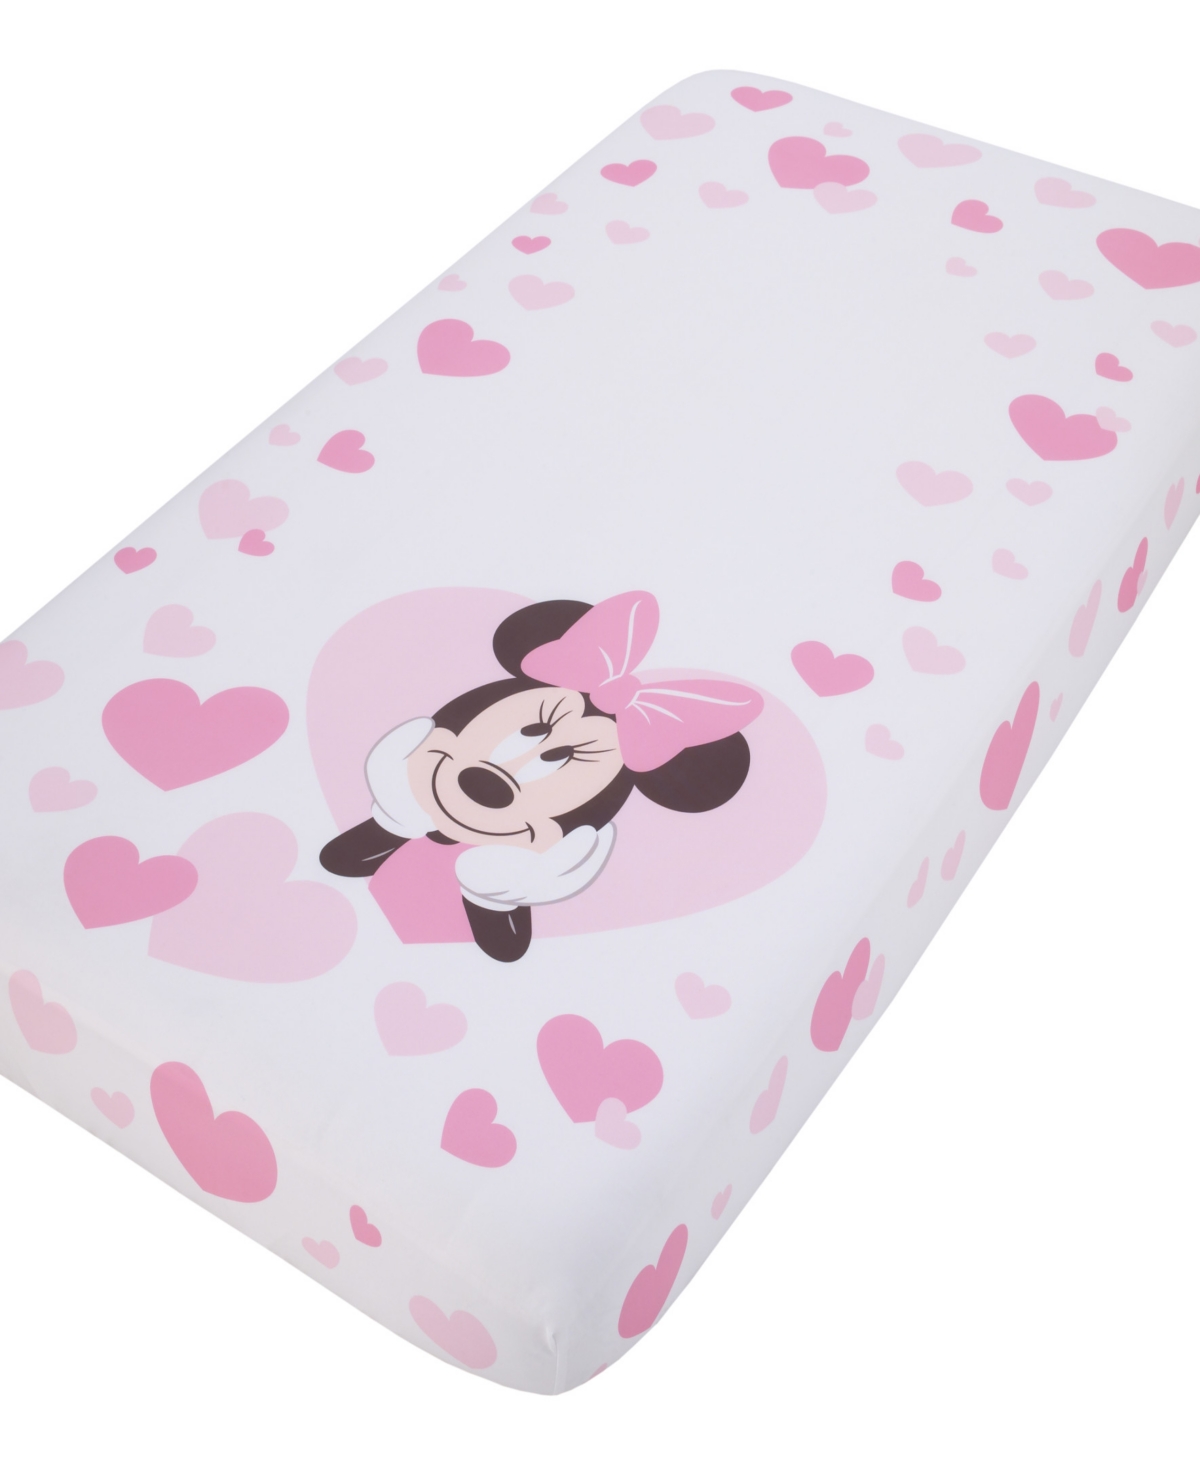 Disney Minnie Mouse, Photo Op Crib Sheet In Pink